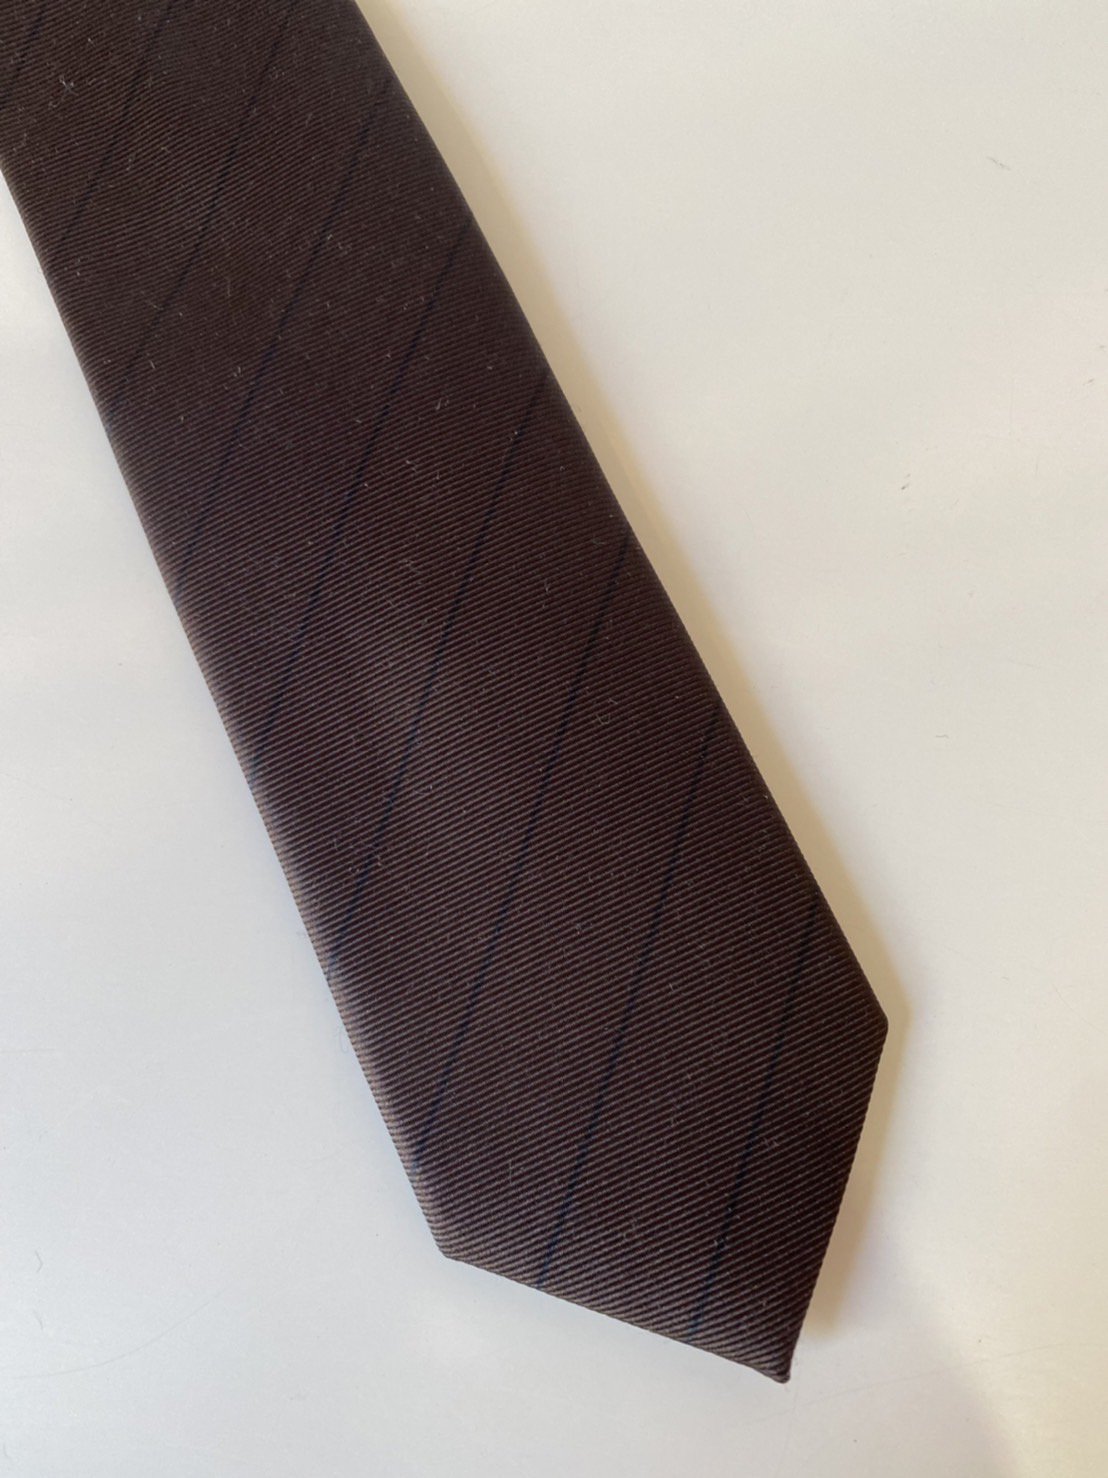 LITTLEBIG<br />Silk Stripe Tie / Brown<img class='new_mark_img2' src='https://img.shop-pro.jp/img/new/icons14.gif' style='border:none;display:inline;margin:0px;padding:0px;width:auto;' />